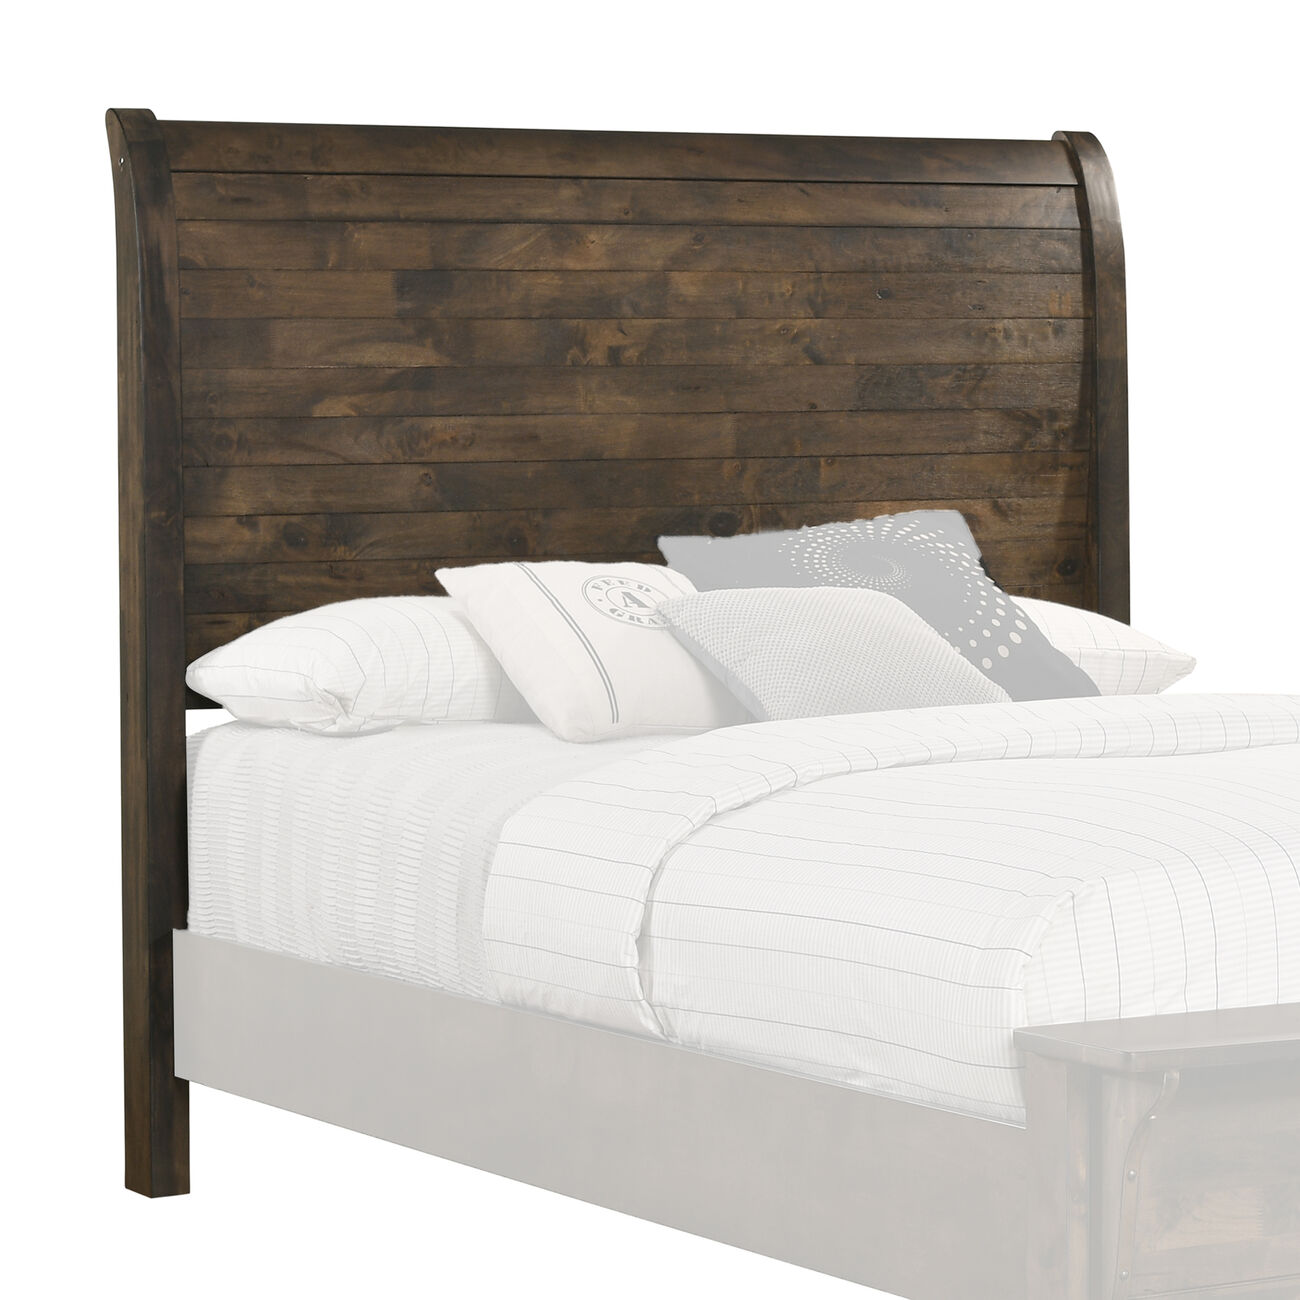 Queen Size Wooden Sleigh Headboard with Paneled Details, Brown